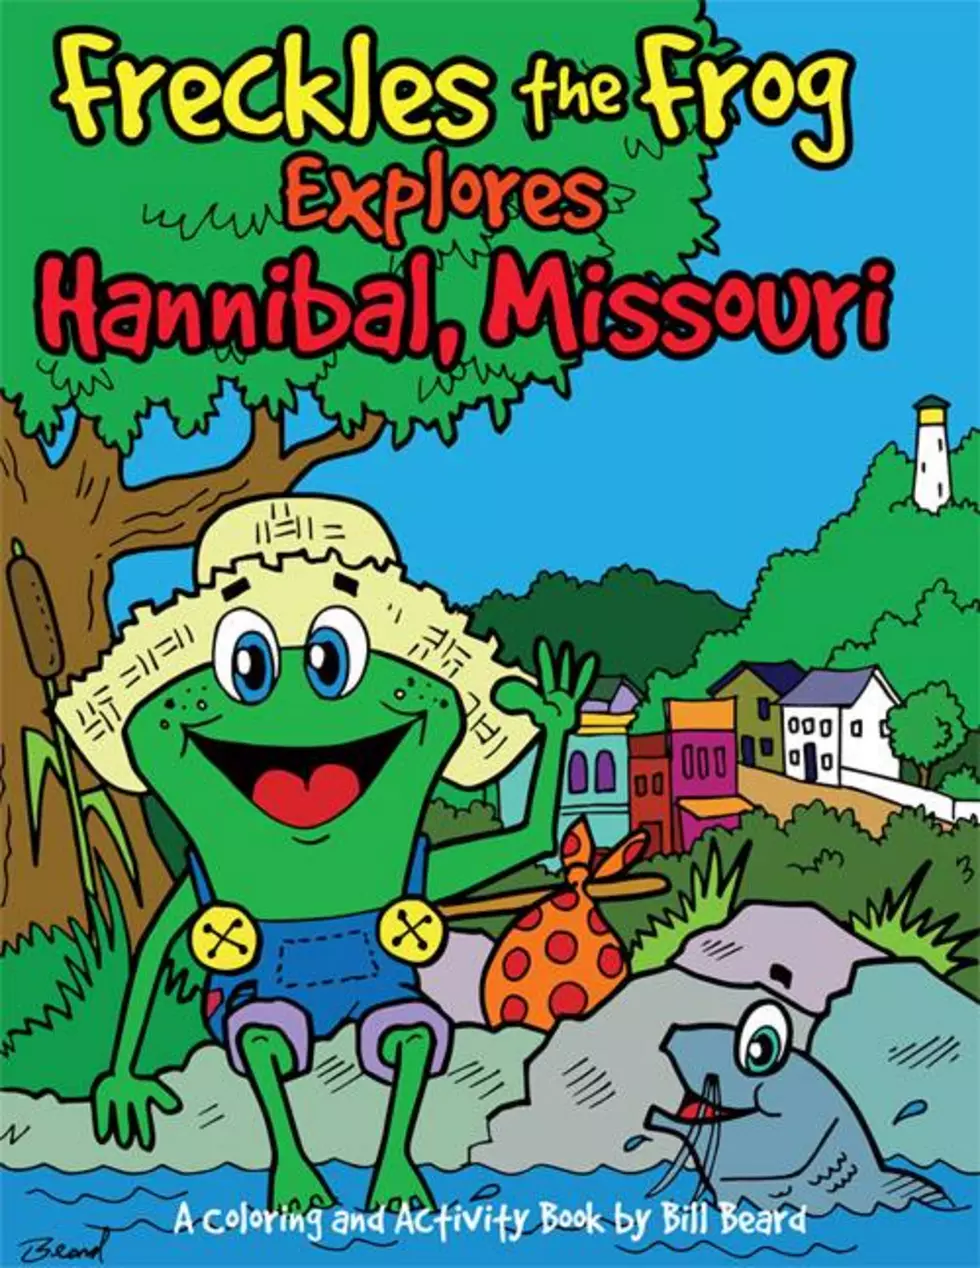 Hannibal Featured in New Coloring and Activity Book